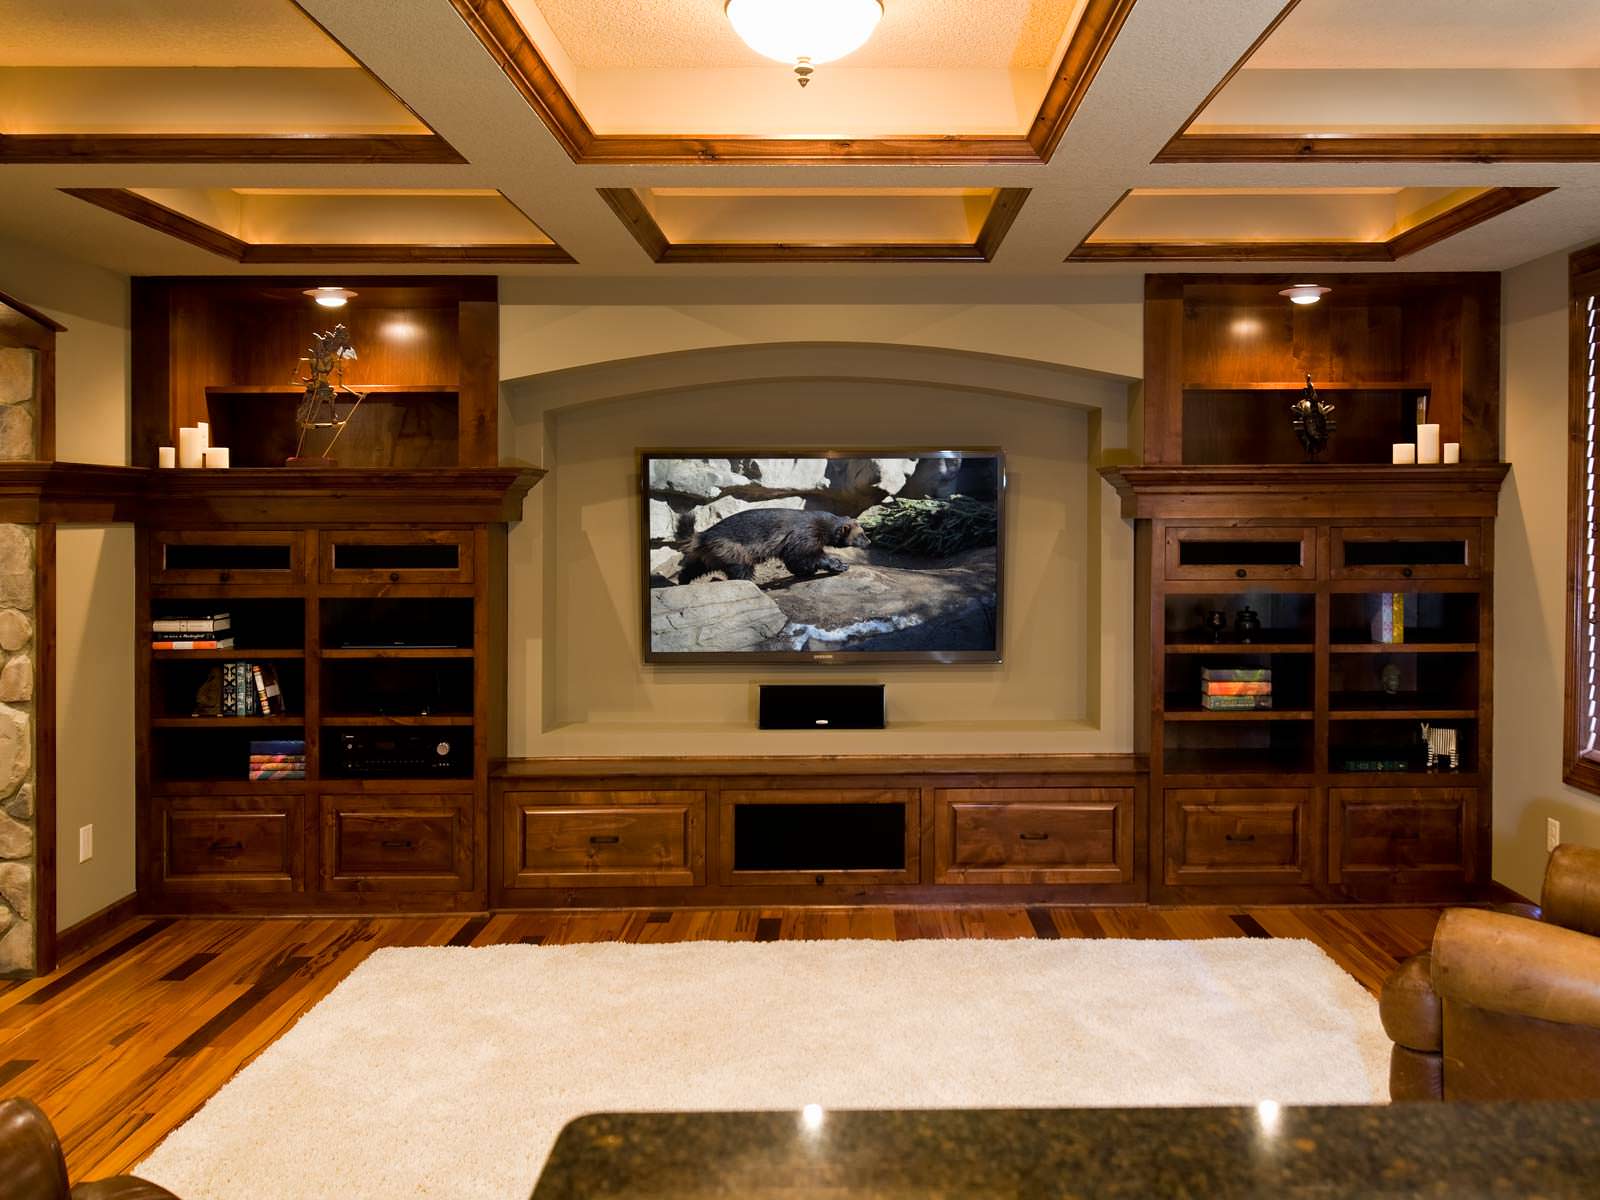 Cool Finished Basement Ideas Pictures